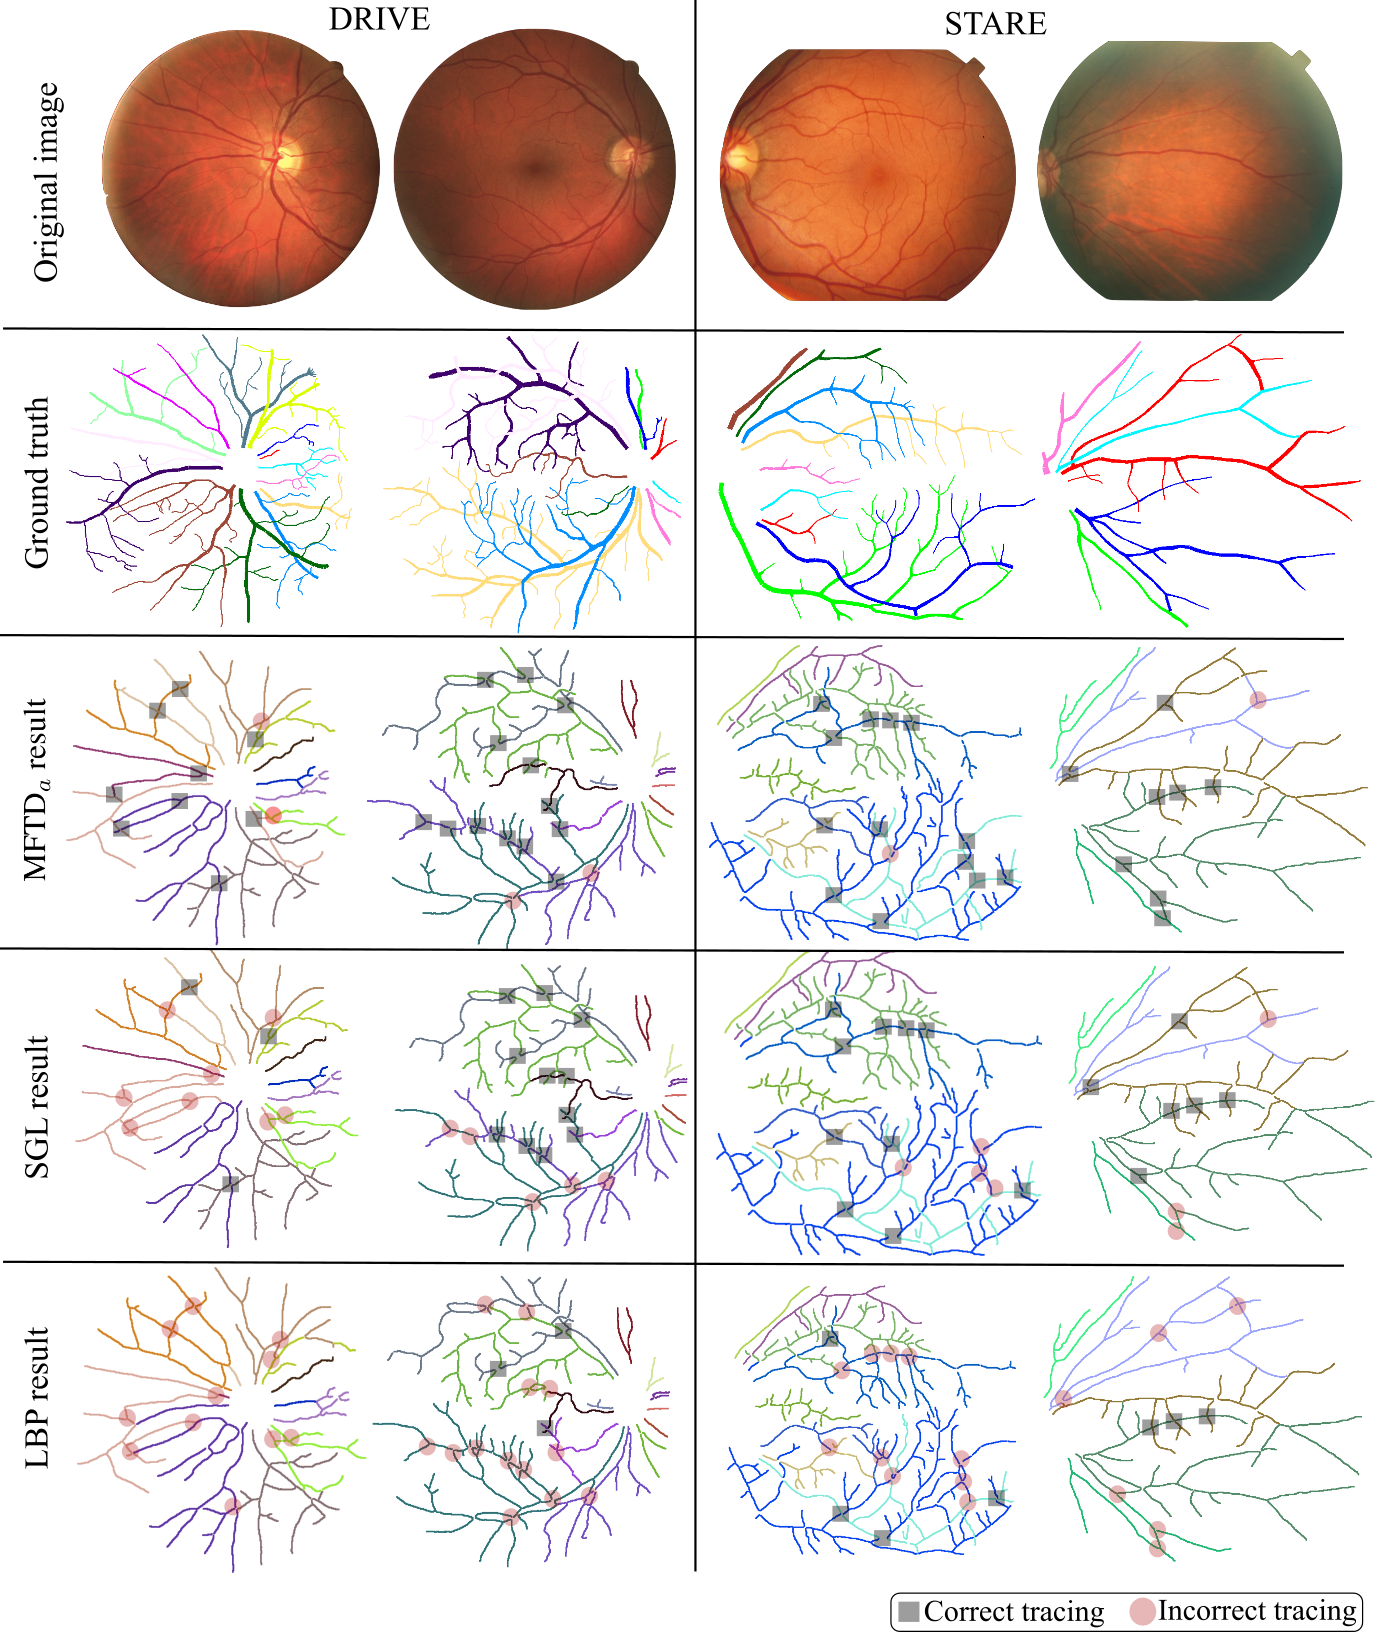 synthetic retinal tracing images